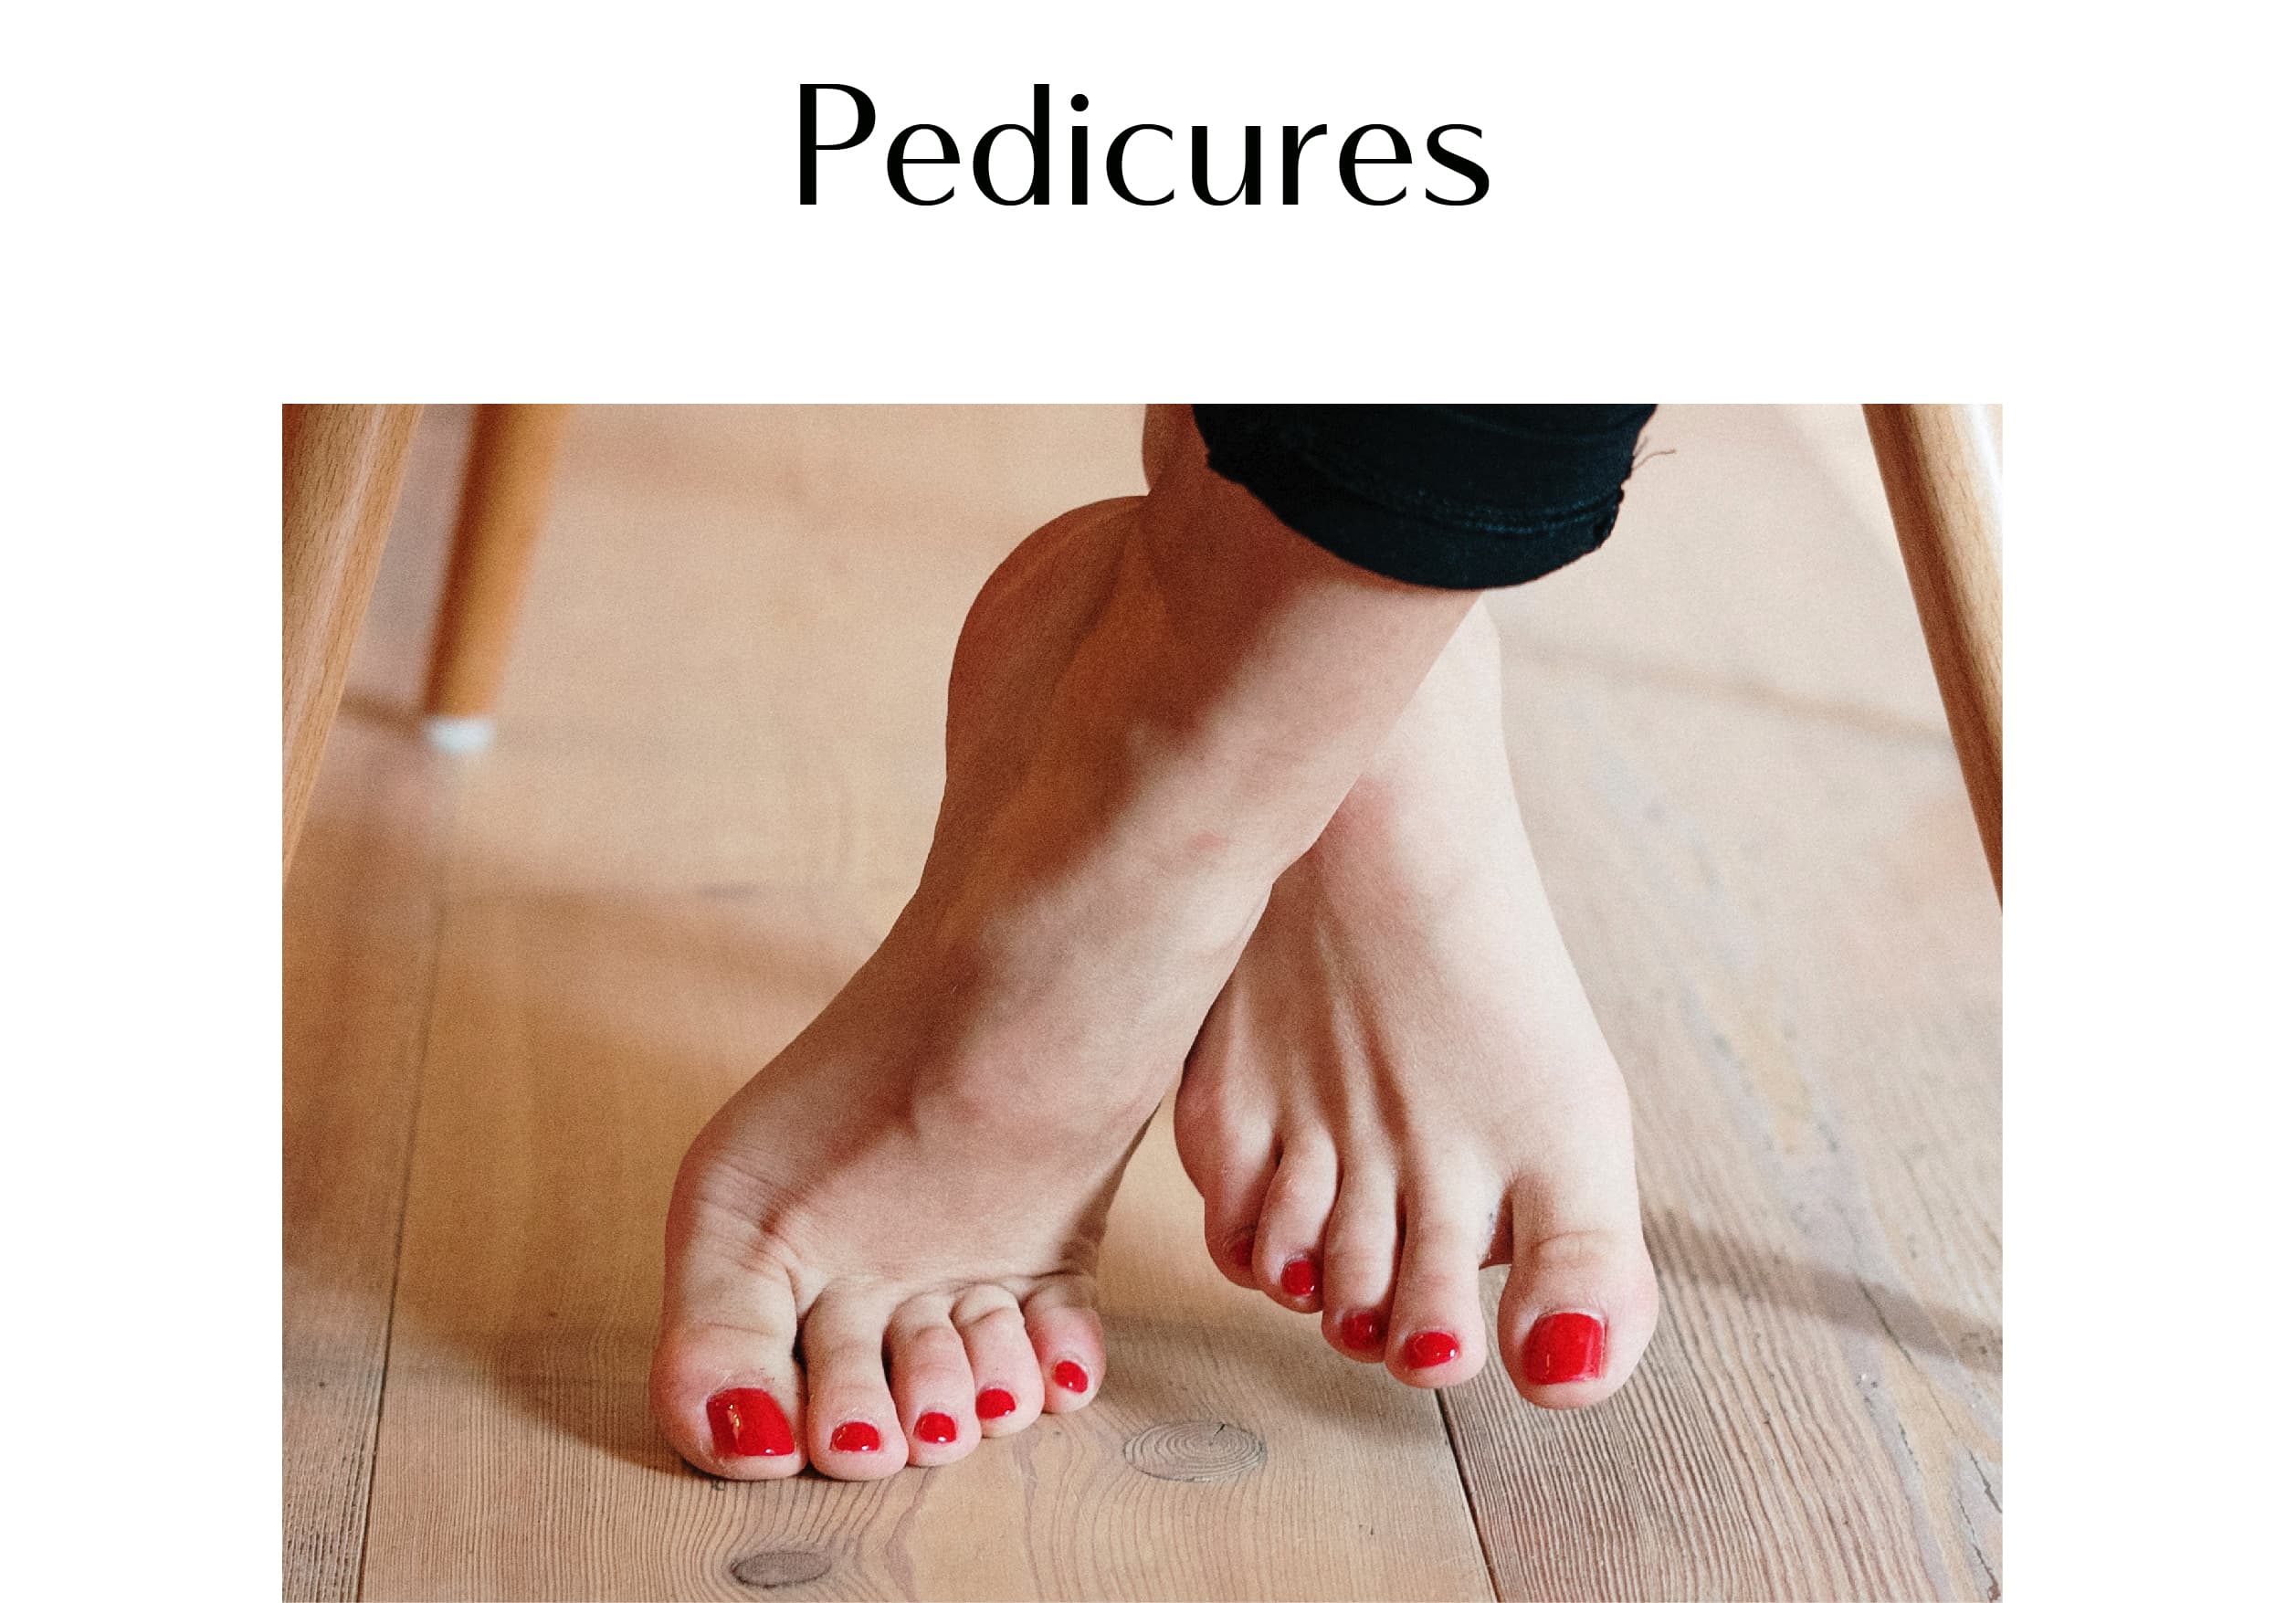 Treat your feet to our ultra-hydrating Detox Pedicure or our super relaxing Re-Charge Pedicure.